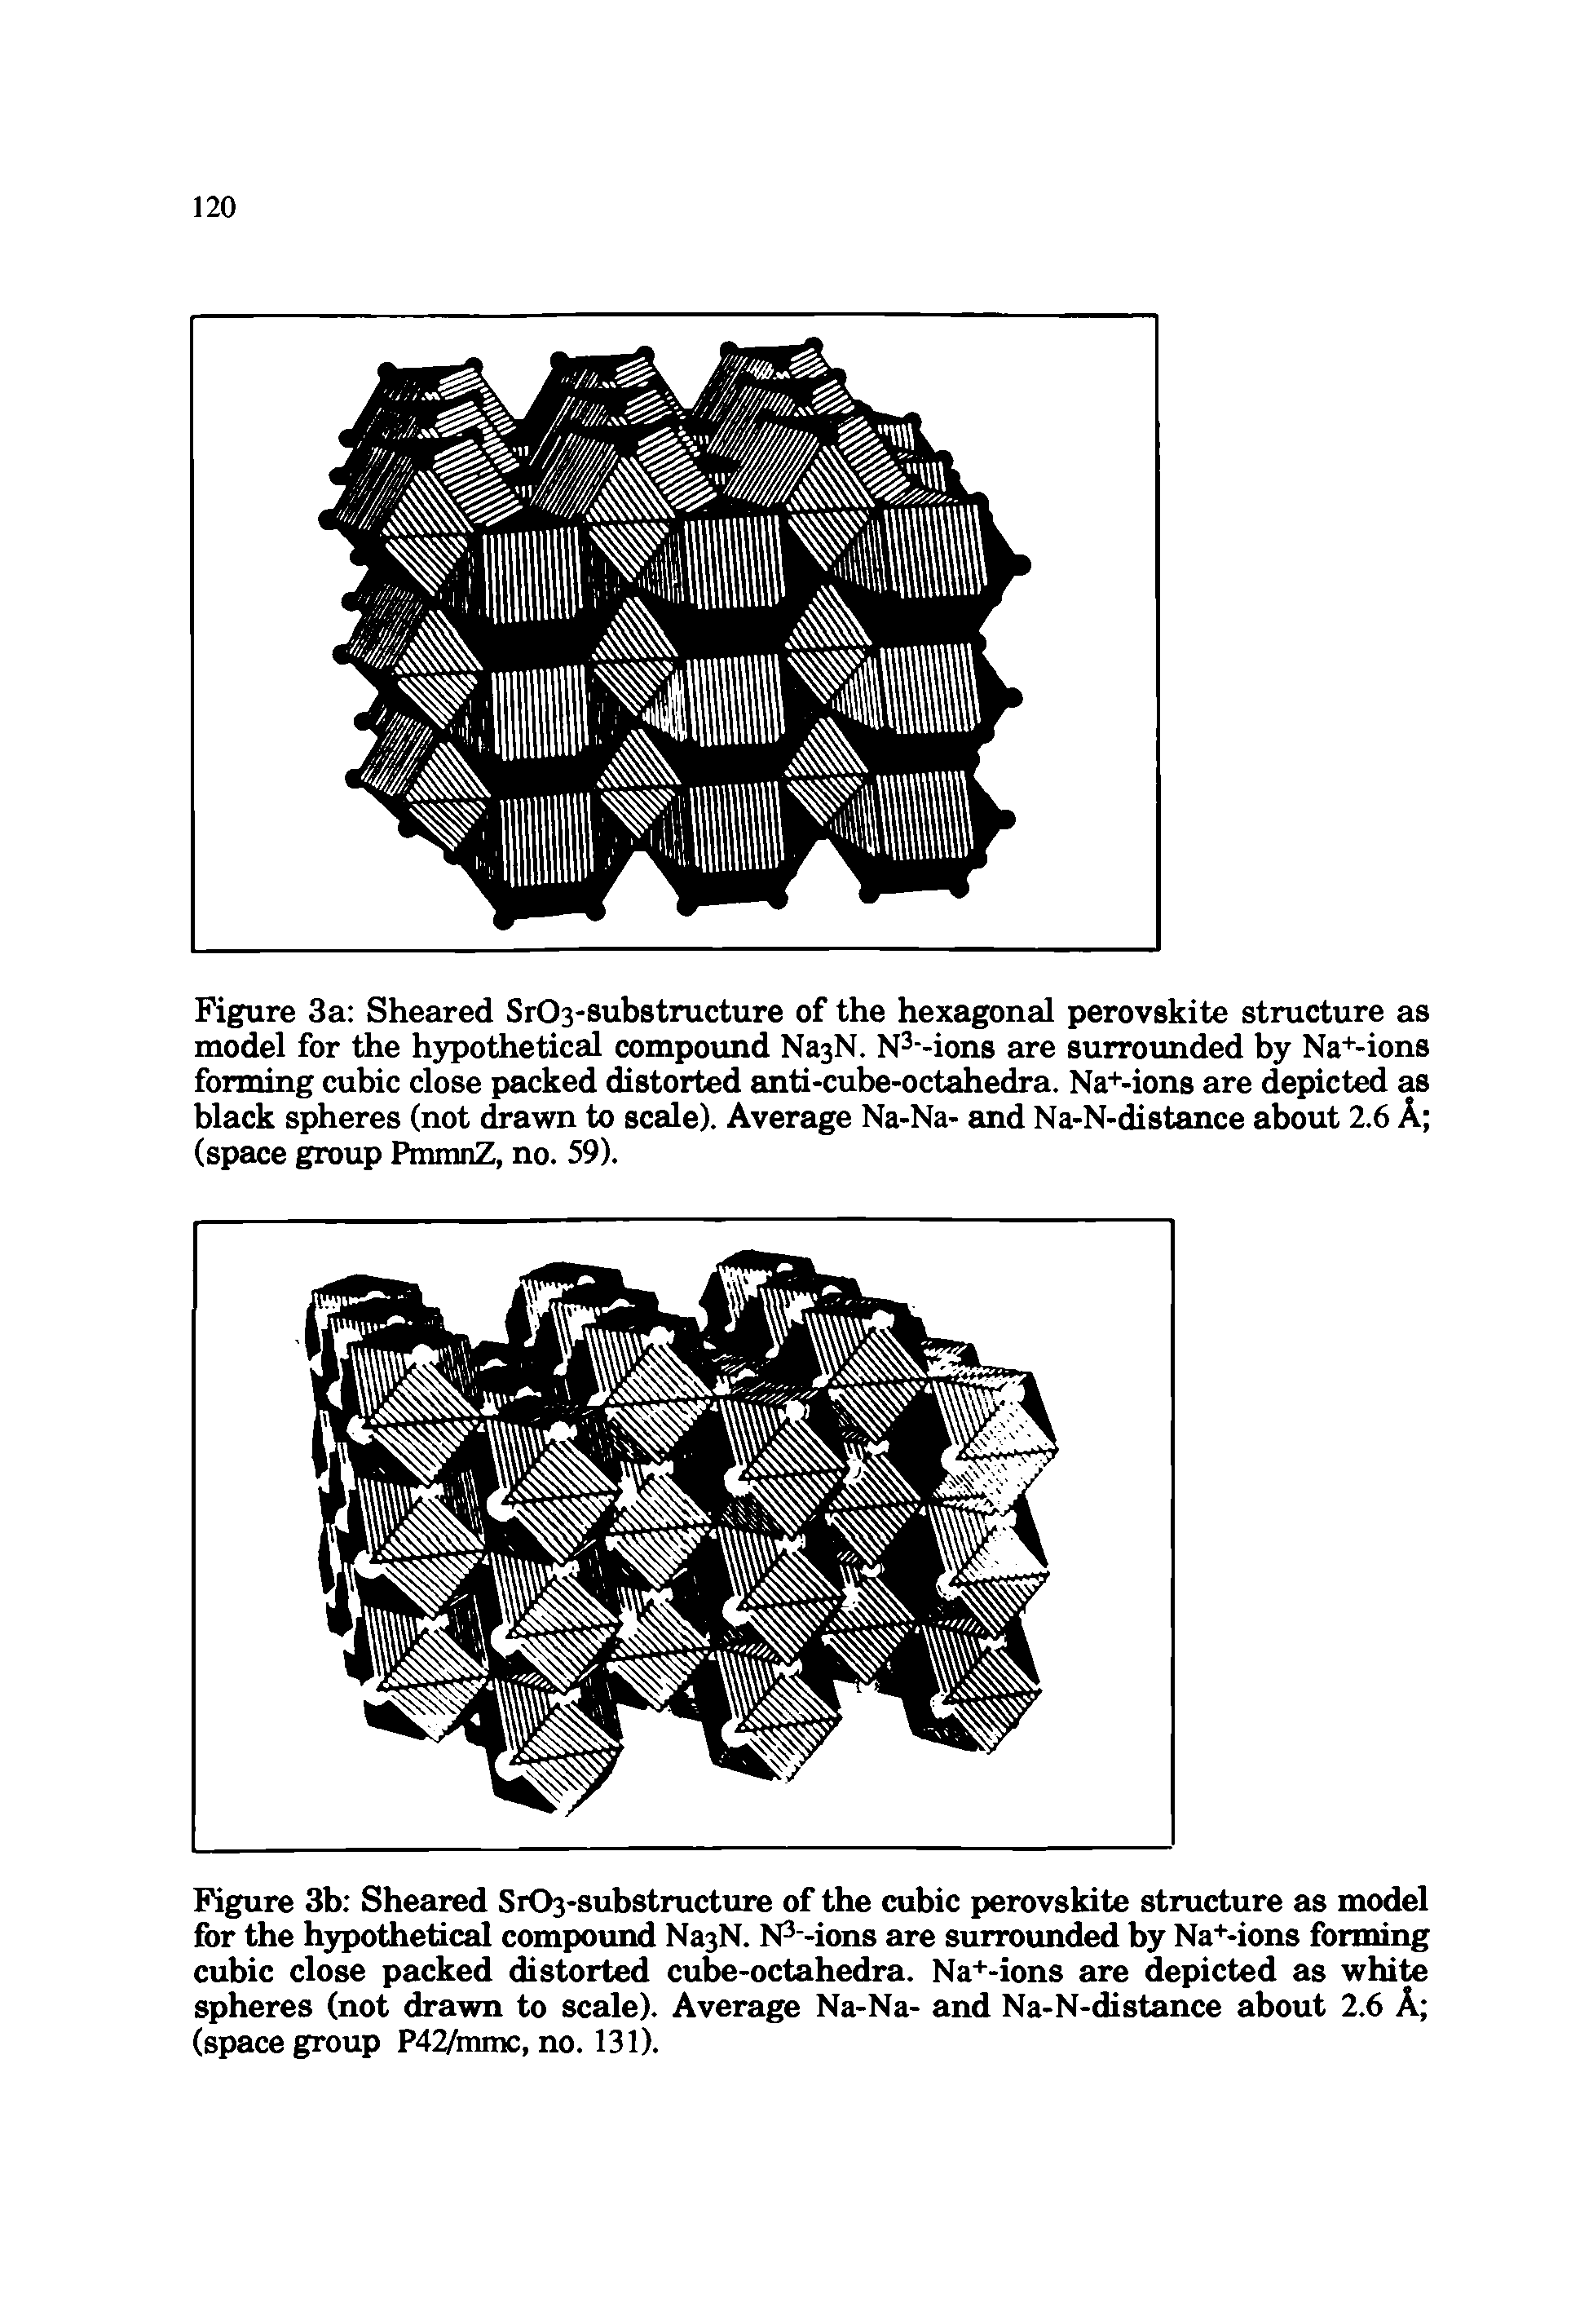 Figure 3a Sheared Sr03-substructure of the hexagonal perovskite structure as model for the hypothetical compound Na3N. N3 -ions are surrounded by Nations forming cubic close packed distorted anti-cube-octahedra. Nations are depicted as black spheres (not drawn to scale). Average Na-Na- and Na-N-distance about 2.6 A (space group PmmnZ, no. 59).